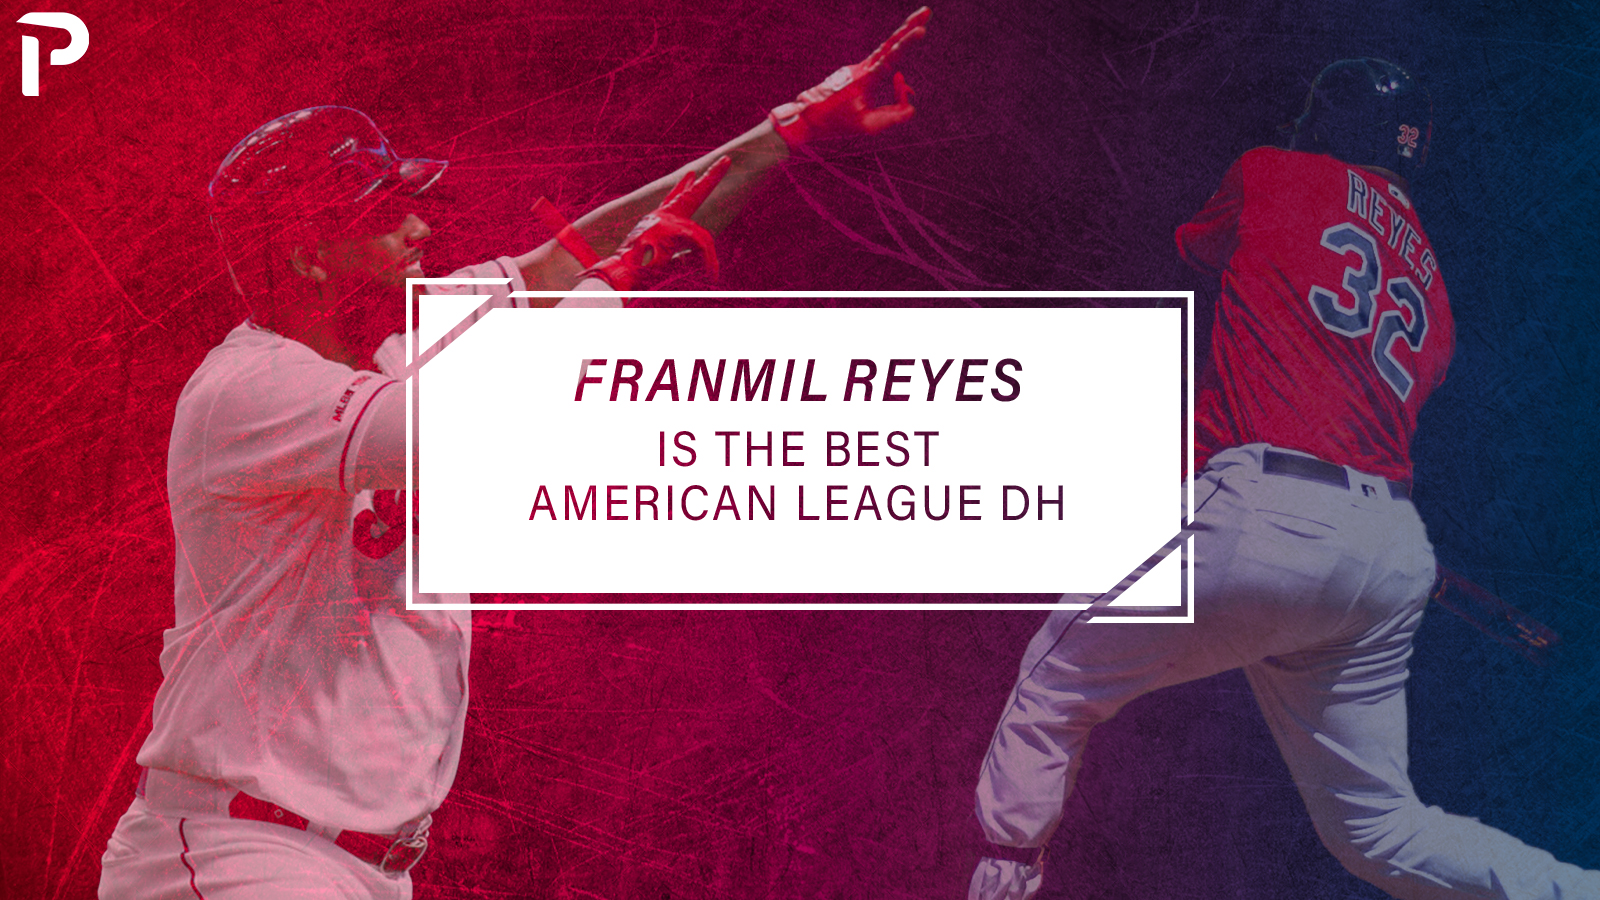 Franmil Reyes is The Best American League DH.